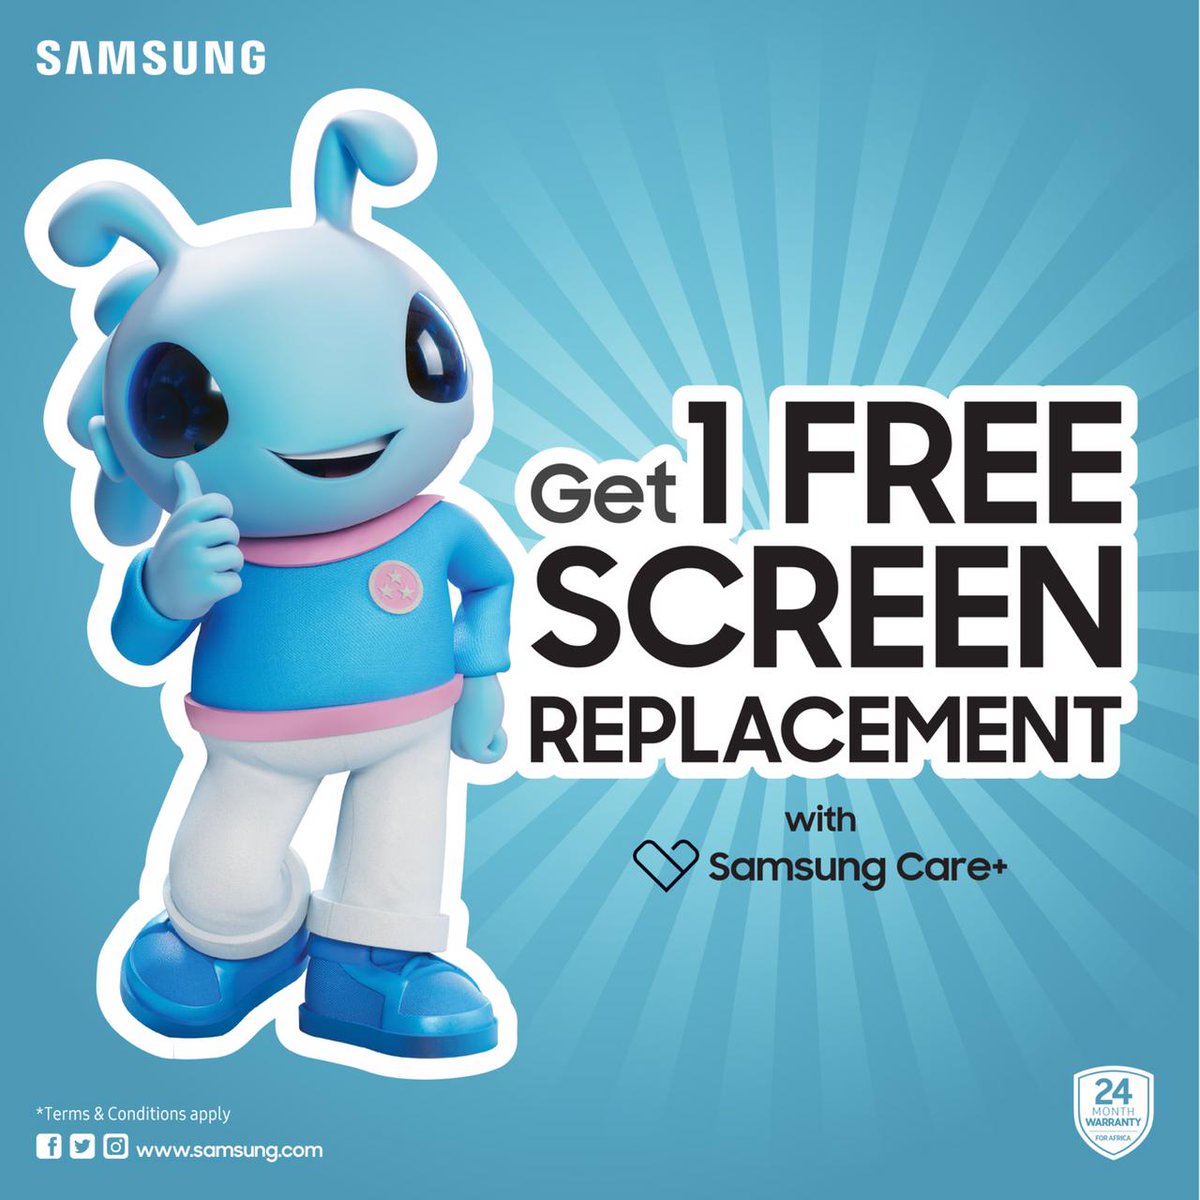 Experience peace of mind with the FREE screen replacement offer from #SamsungCarePlus. We've got your back! 😉 Usiogope screen kuvunjika. Register within the first 30 days of your purchase uenjoy izi offers
T&Cs apply.
#AccessibleForAll #GalaxyASeriesKE
@SamsungMobileKE